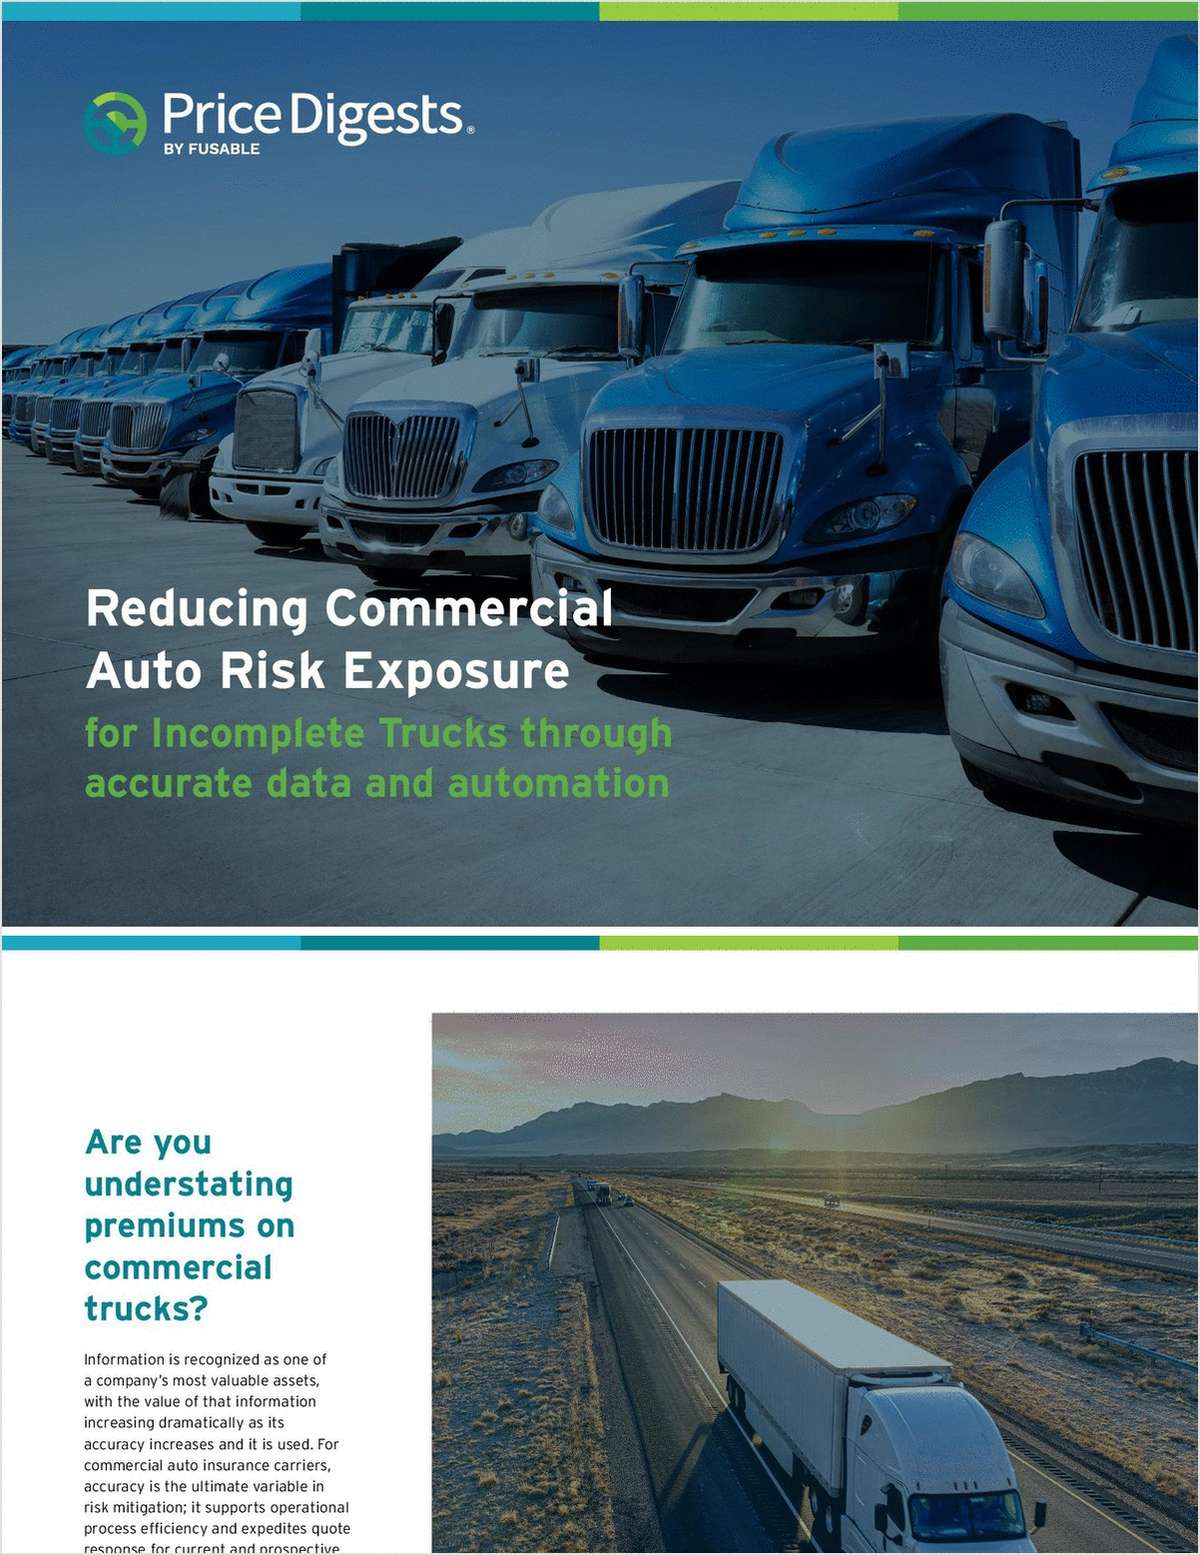 Reducing Commercial Auto Risk Exposure for Incomplete Trucks Through Accurate Data and Automation link